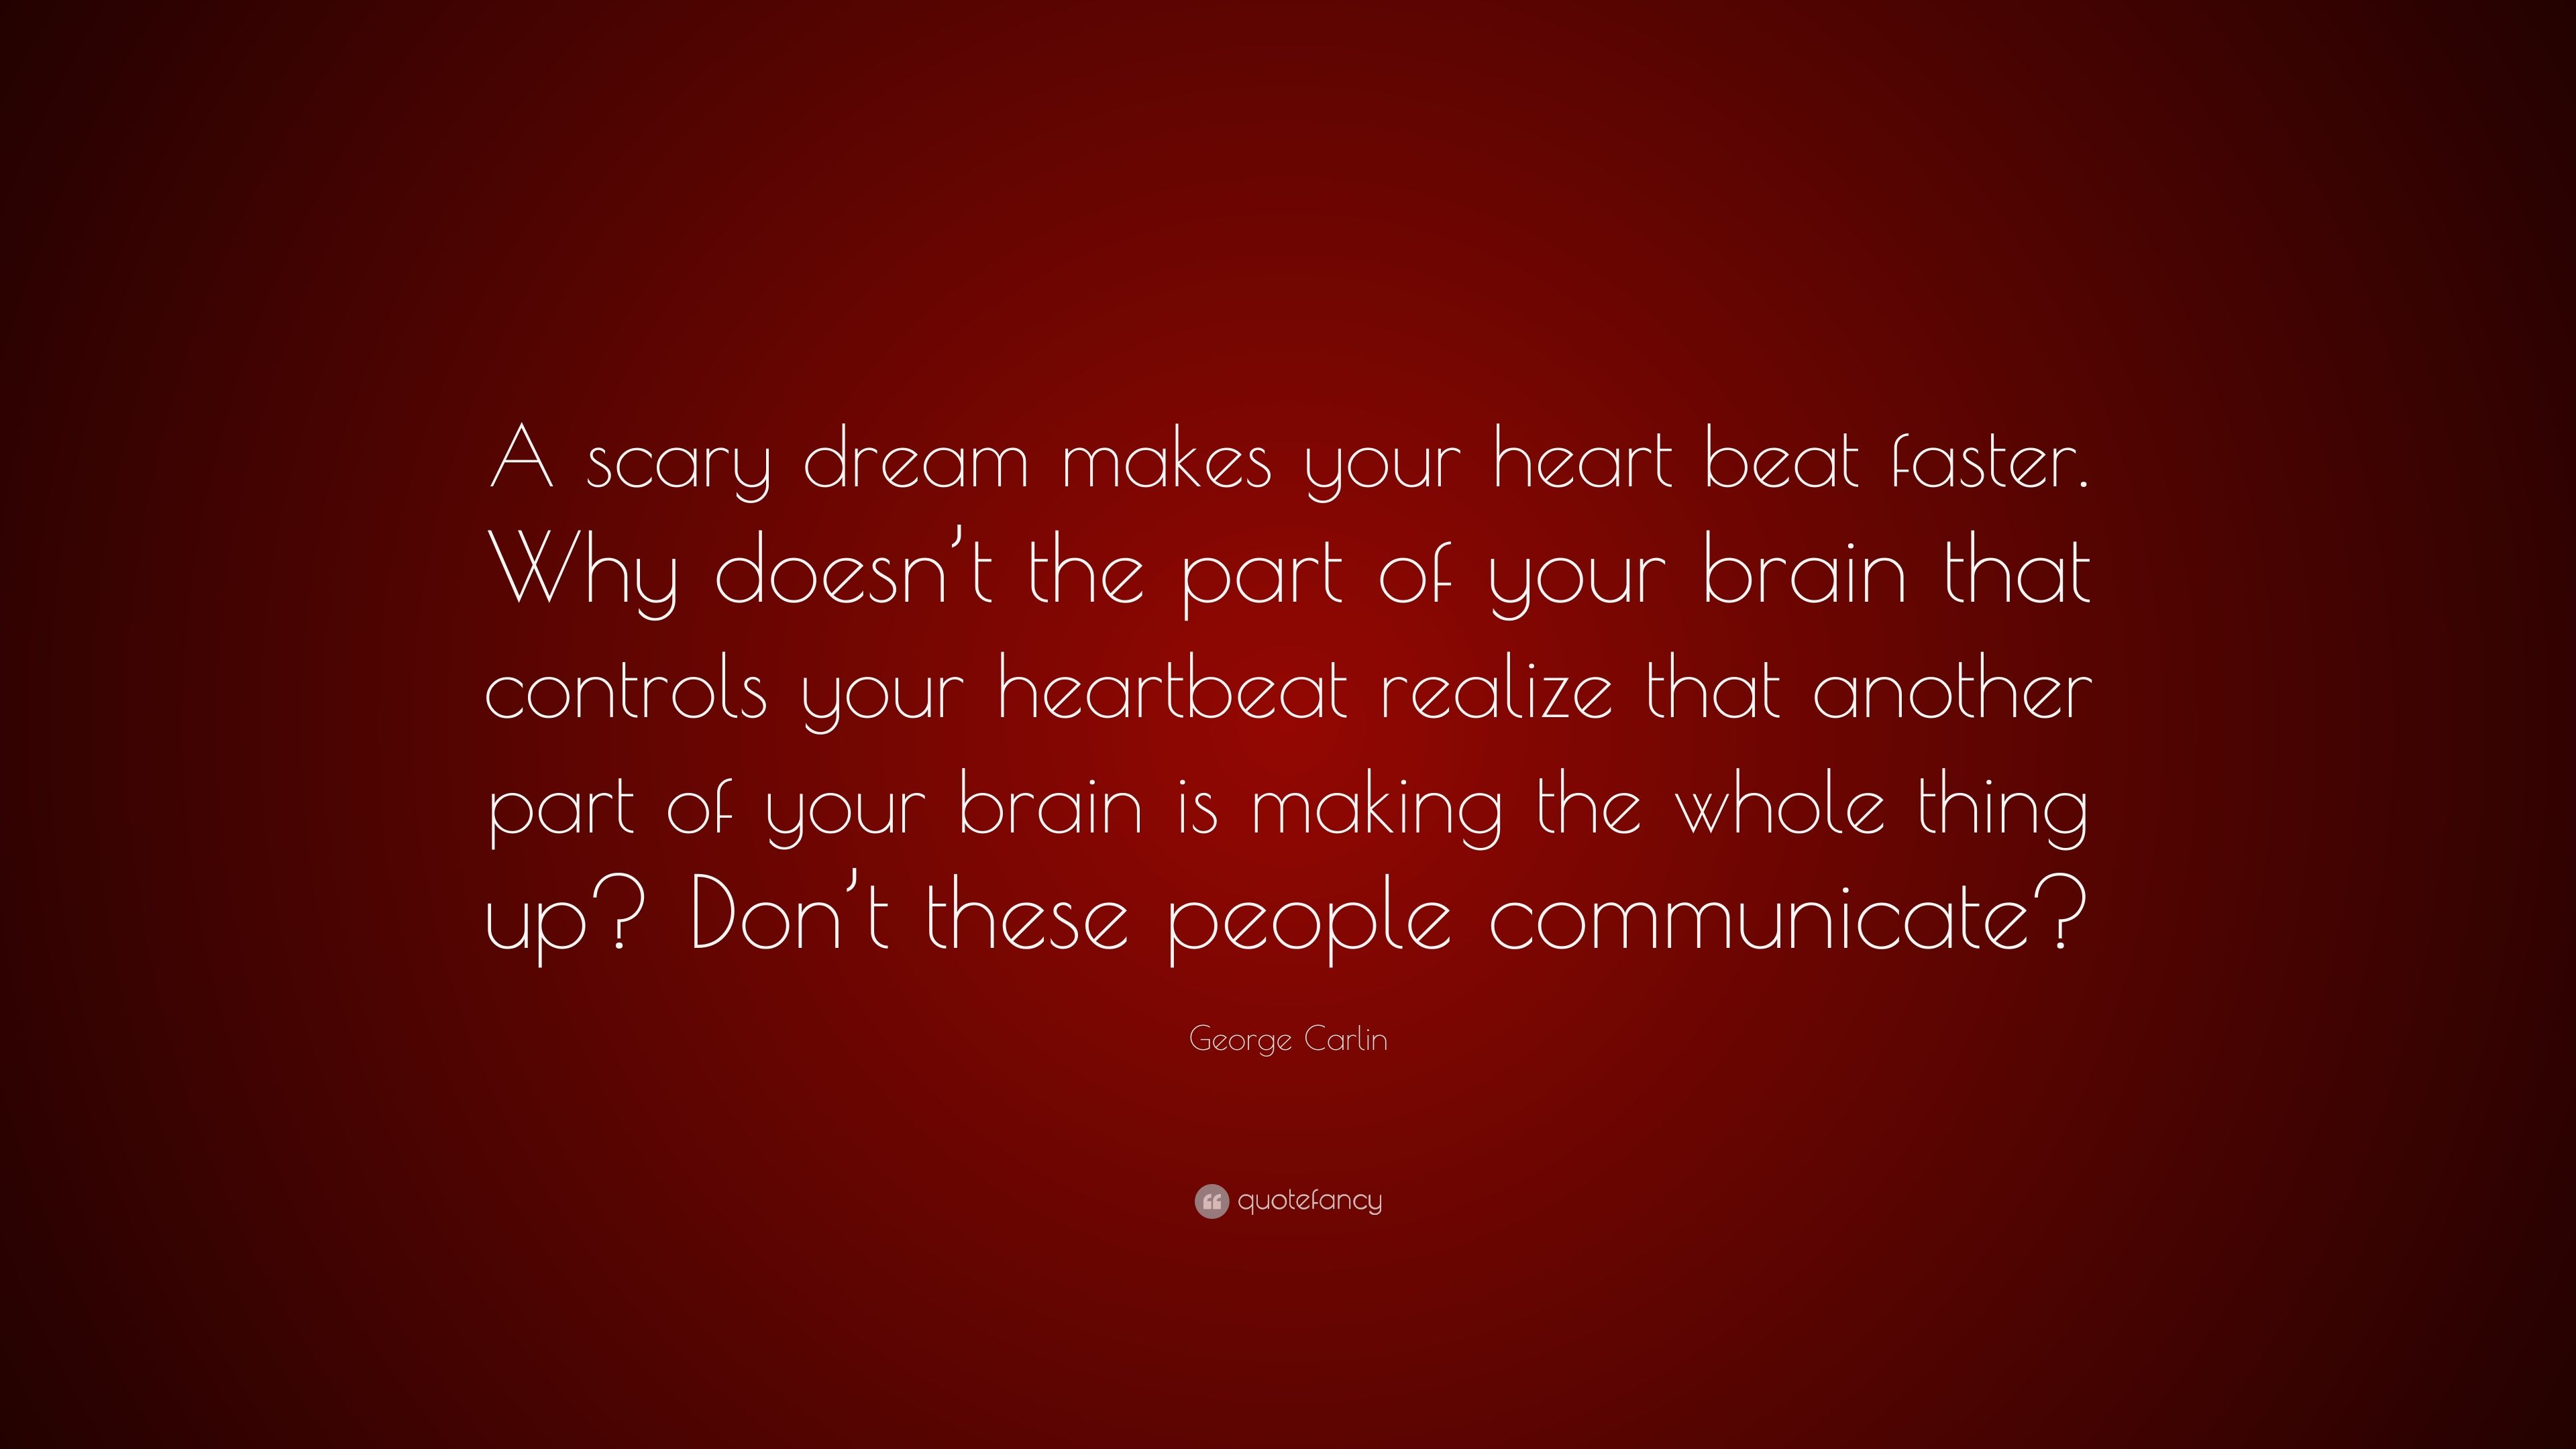 George Carlin Quote: “A scary dream makes your heart beat faster